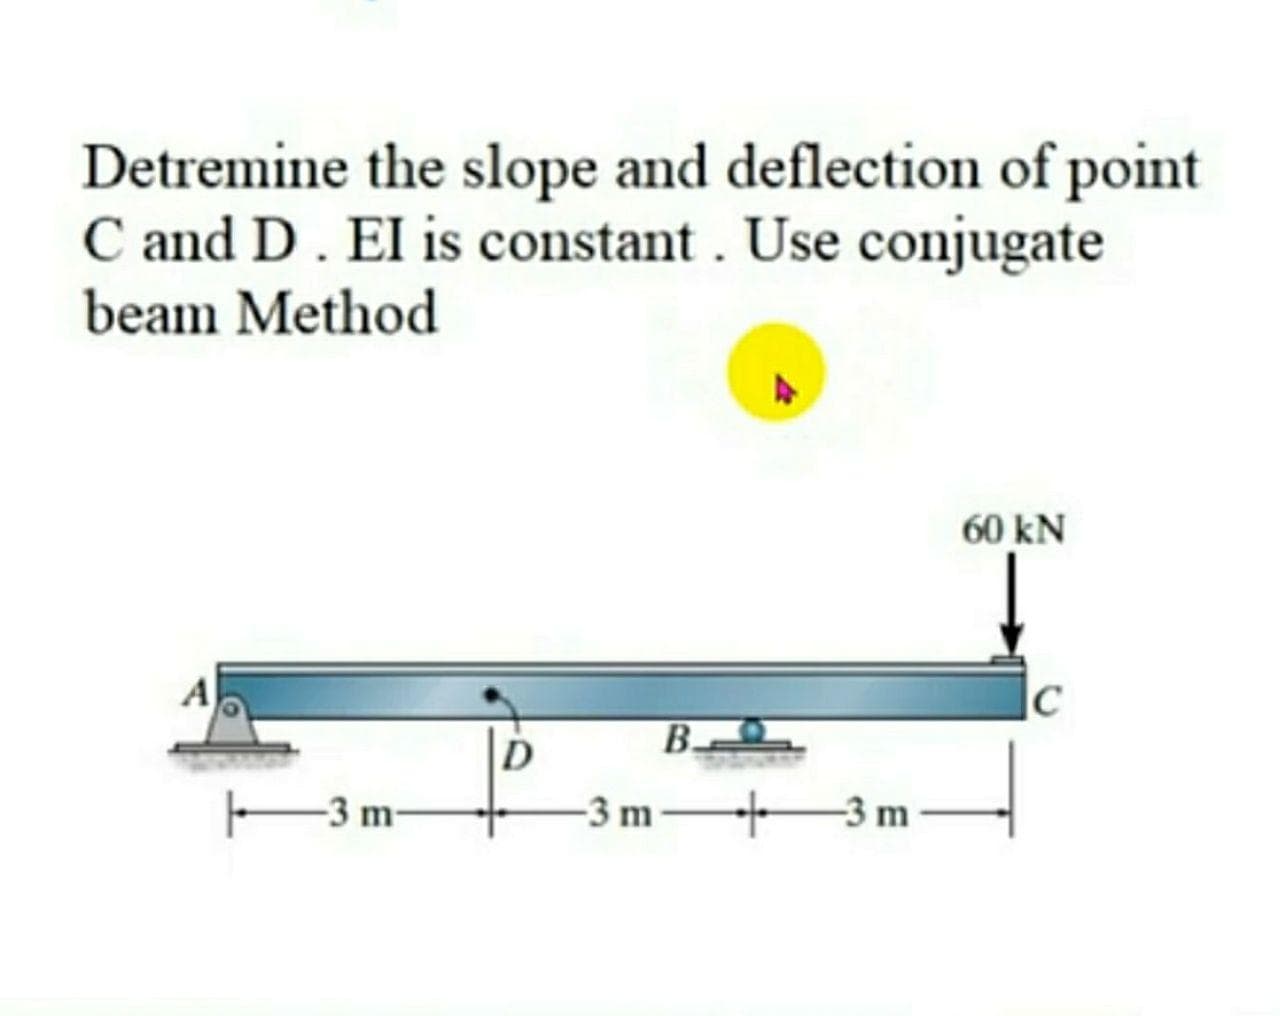 Detremine the slope and deflection of point
C and D . El is constant . Use conjugate
beam Method
60 kN
A
C
B.
D
E3 m-
-3 m +3 m
